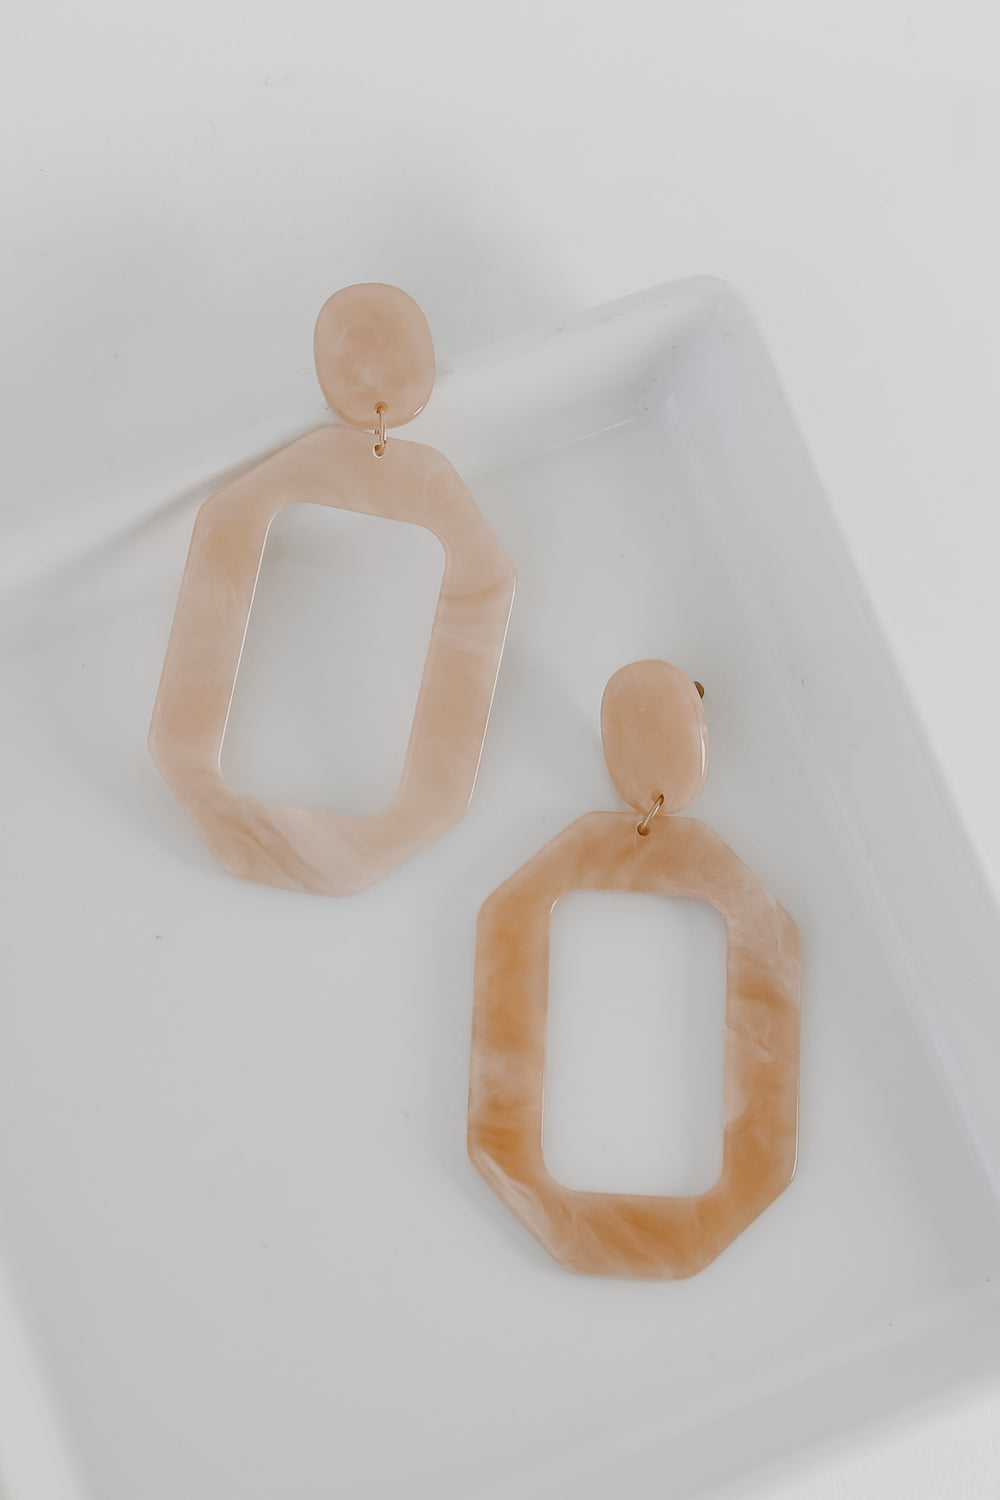 Acrylic Statement Earrings in natural